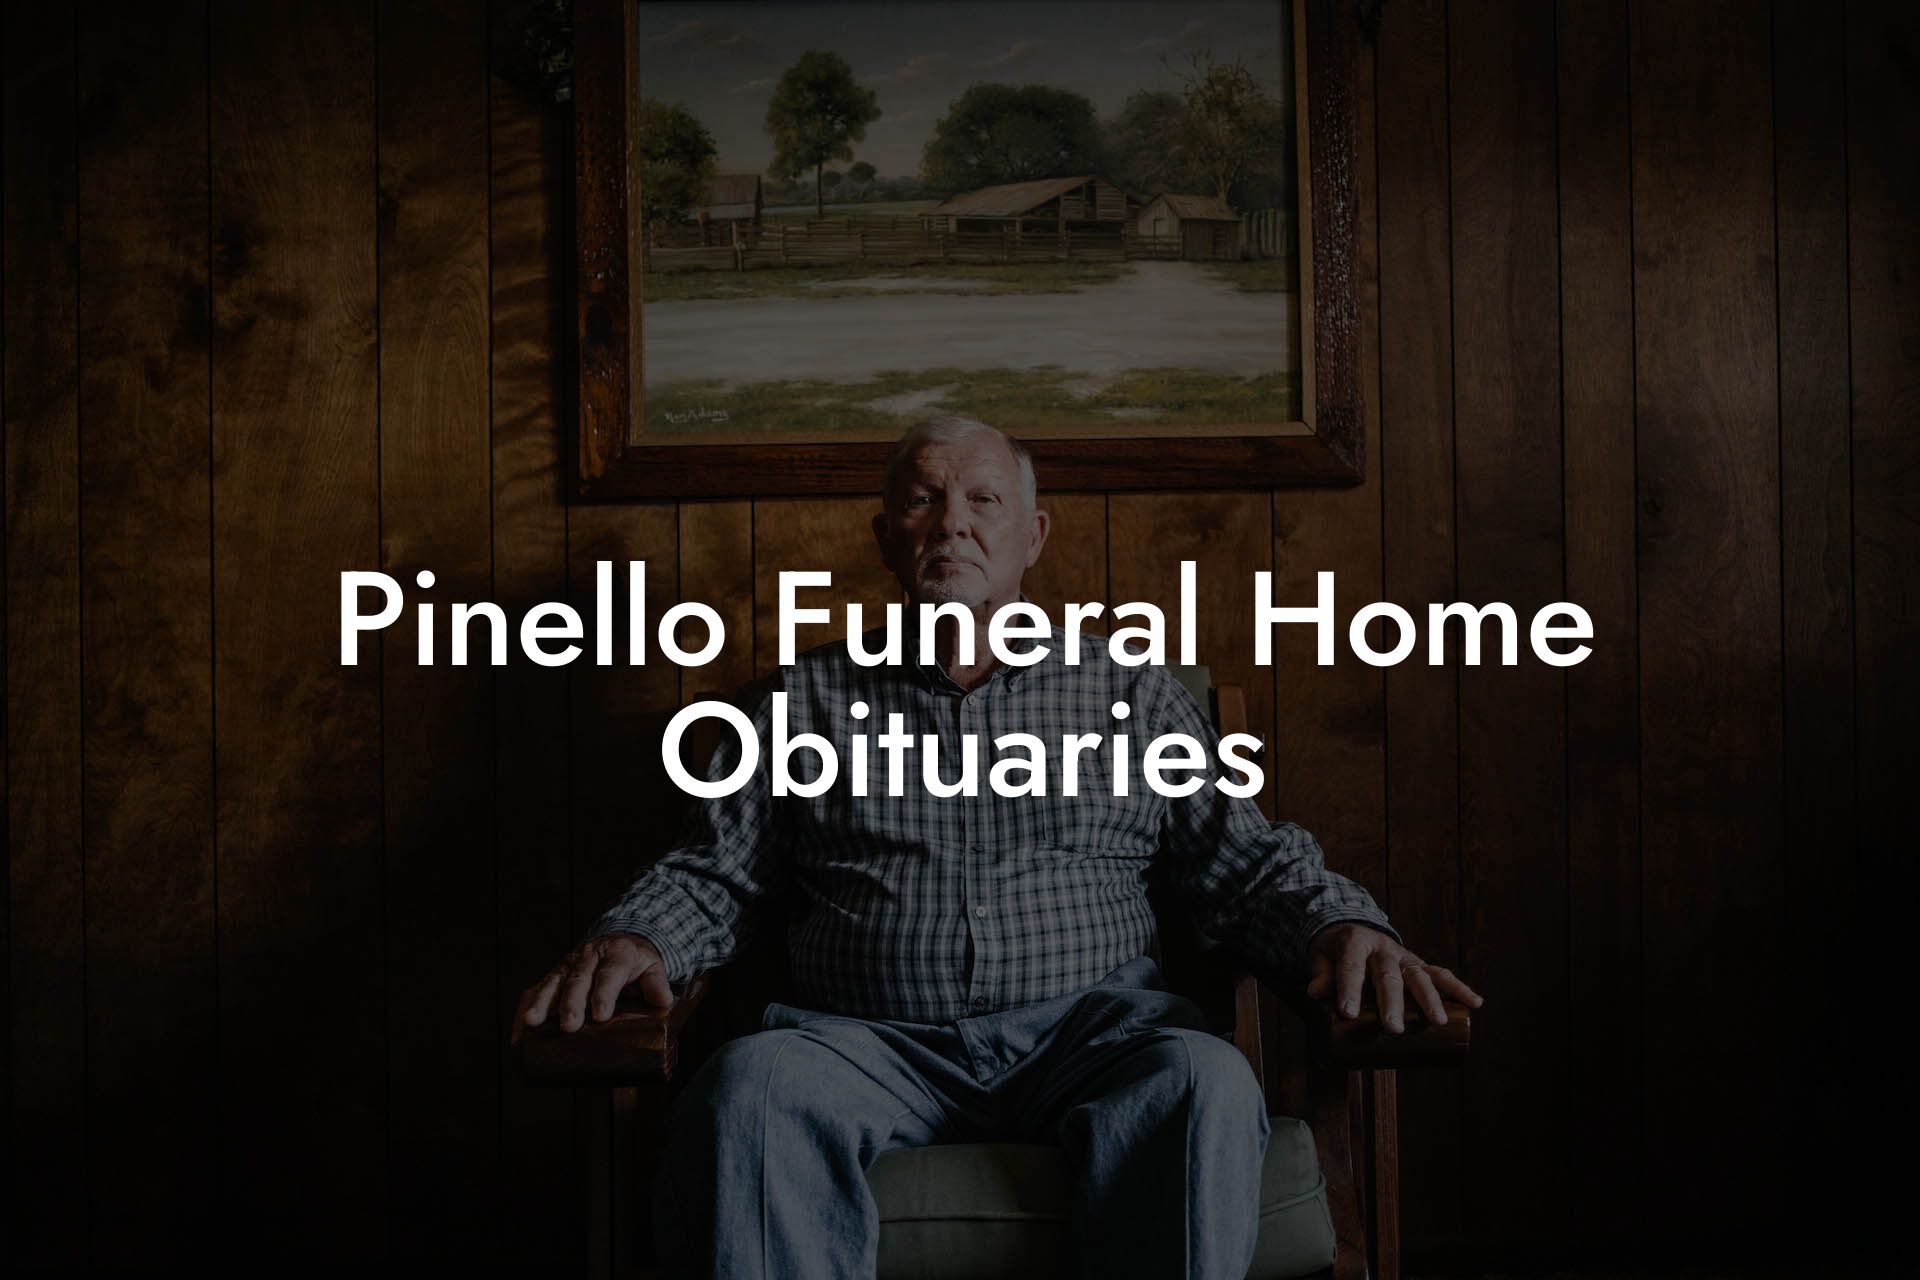 Pinello Funeral Home Obituaries